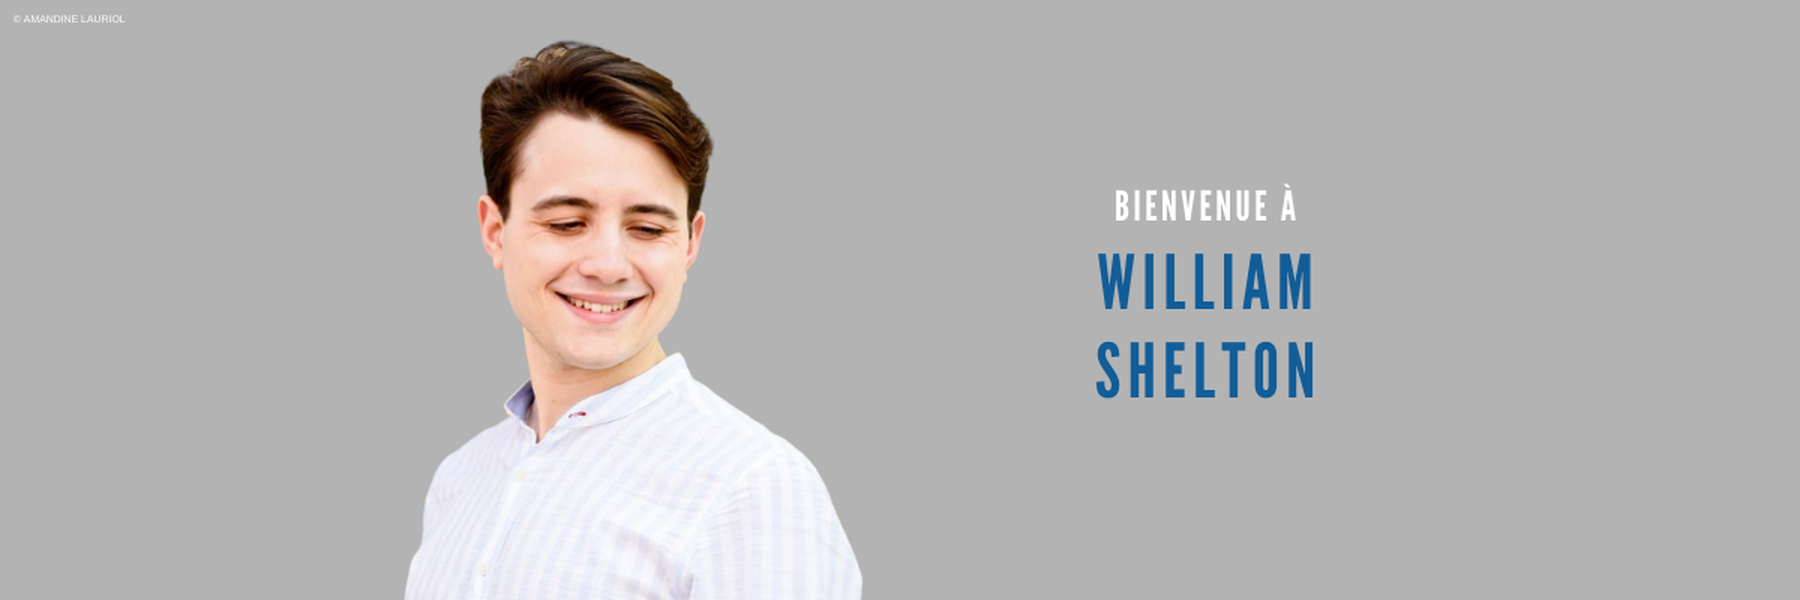 <h1>Welcome to William Shelton</h1>